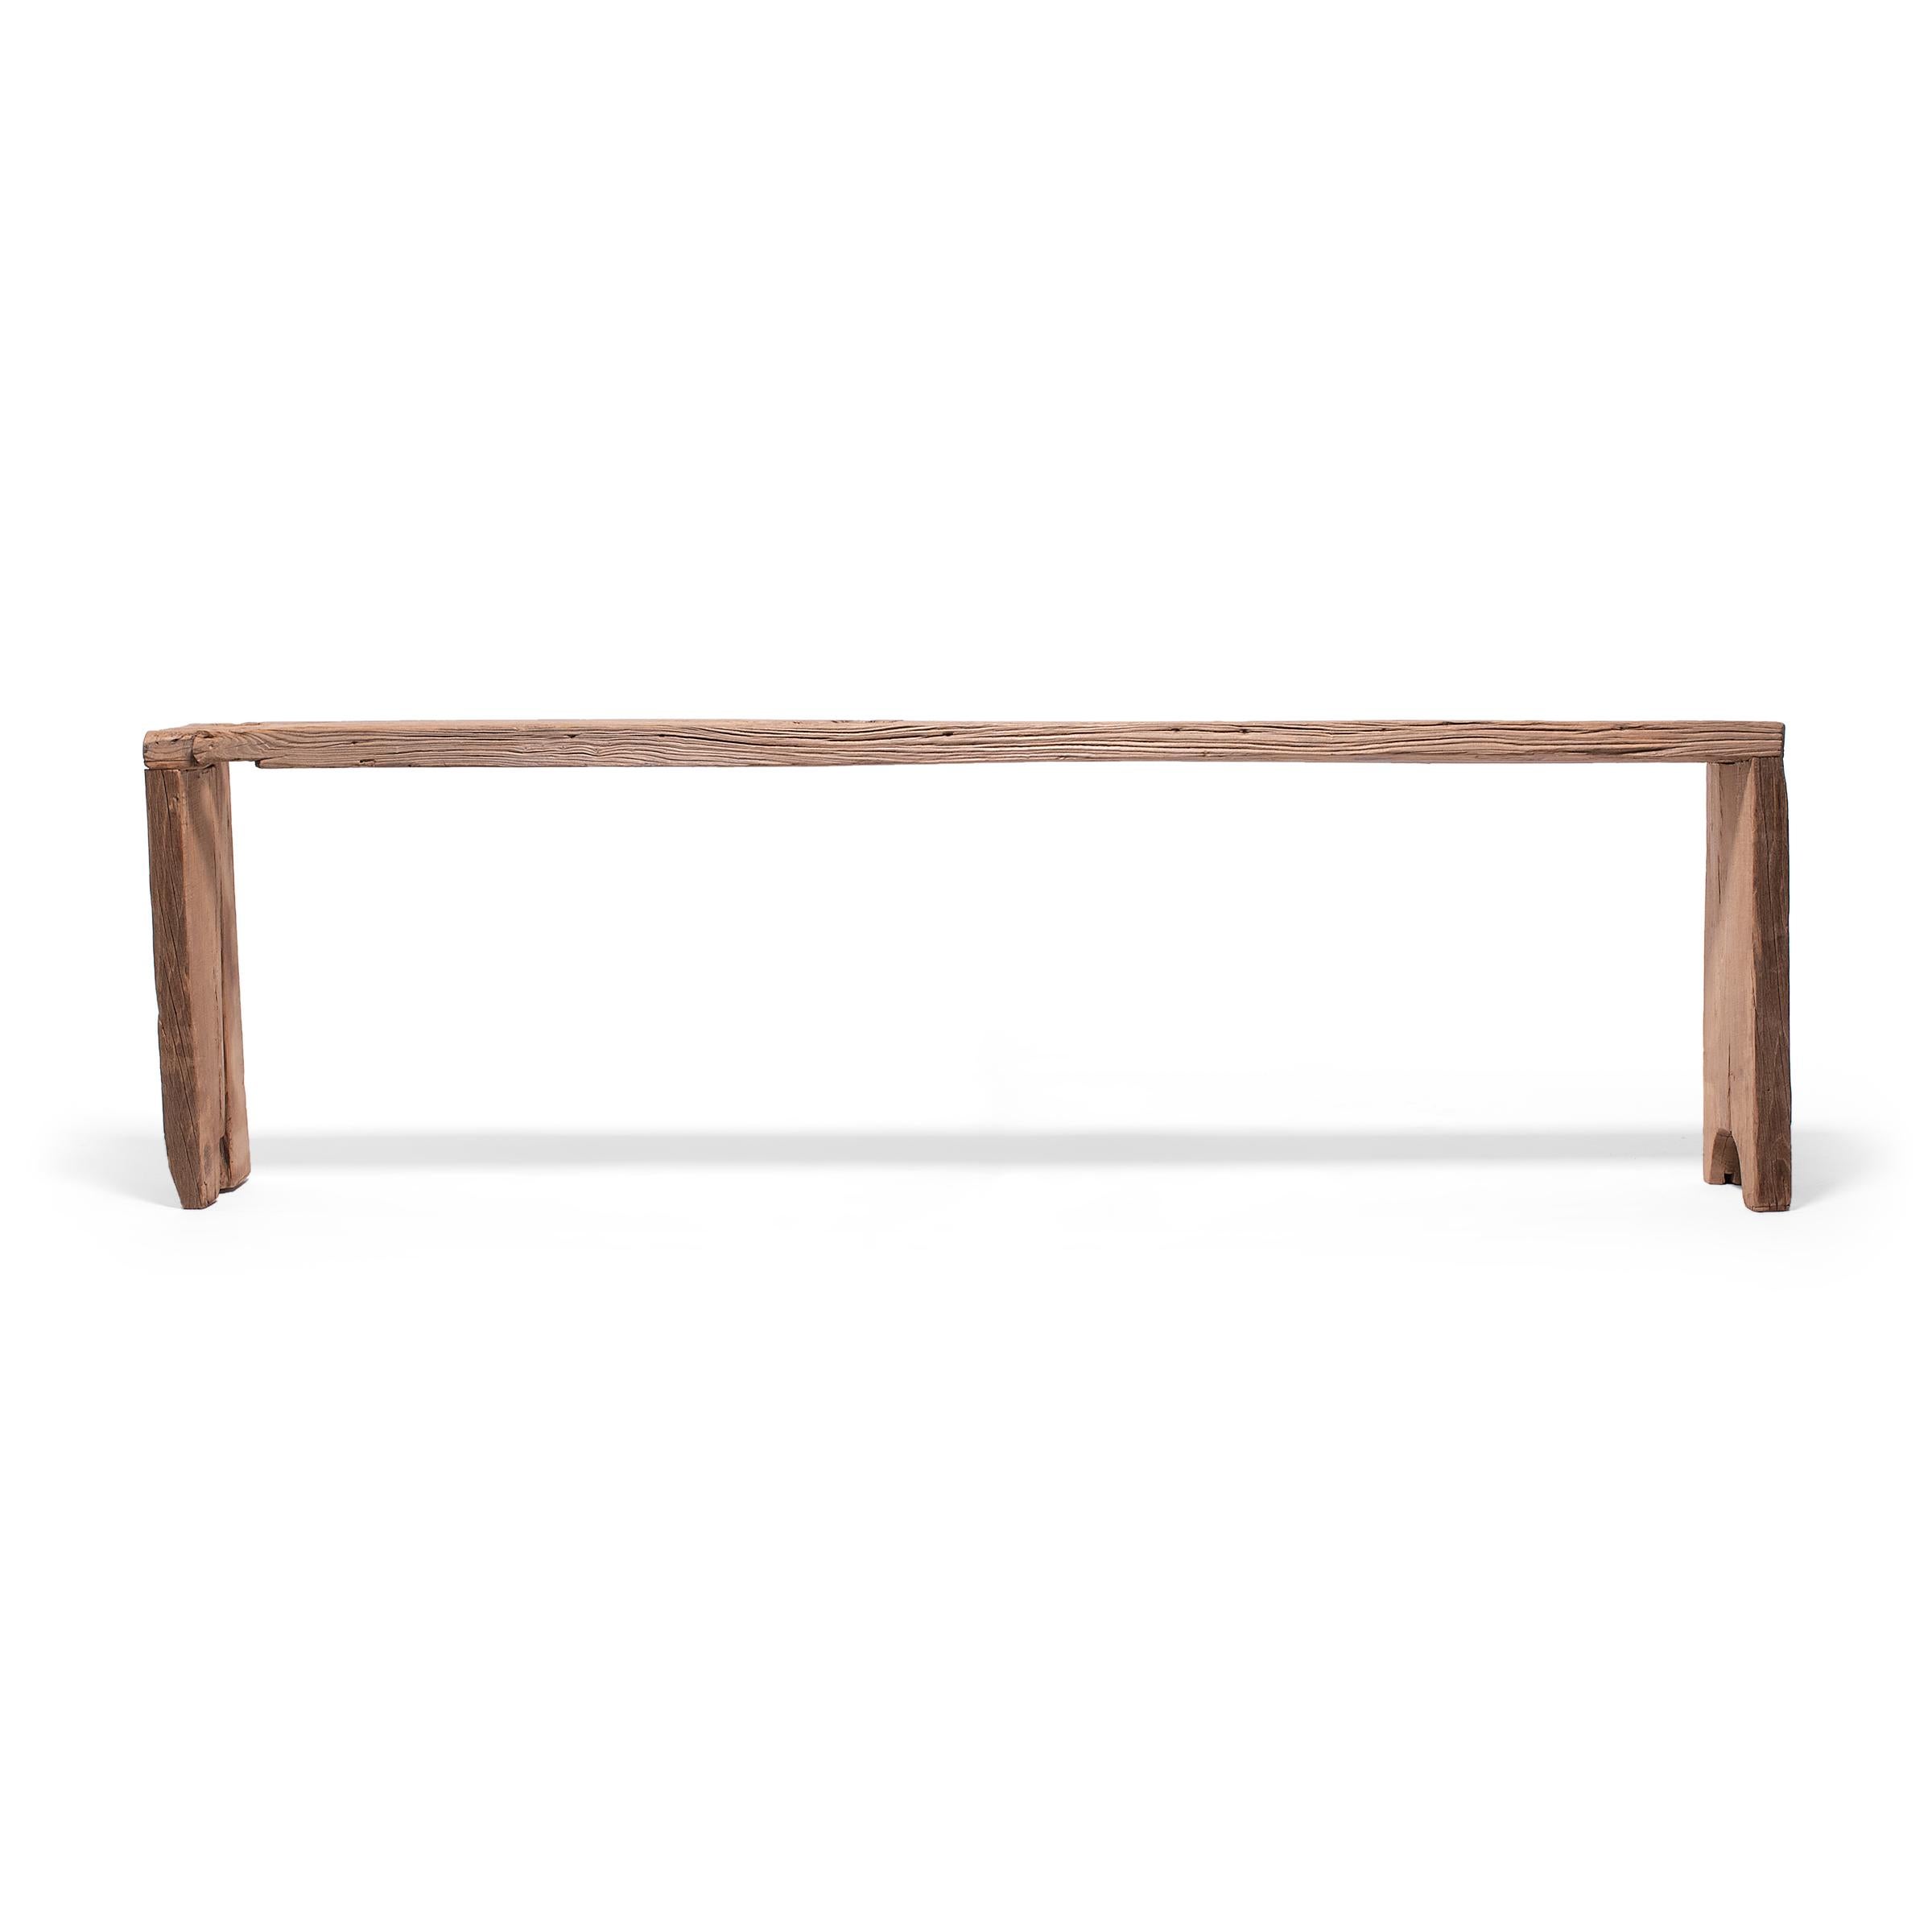 Made of wood reclaimed from Qing-dynasty architecture, this long contemporary altar table is a celebration of wabi-sabi style. In the spirit of traditional Chinese joinery, the corners are finished with dovetail joints for a modern waterfall design.